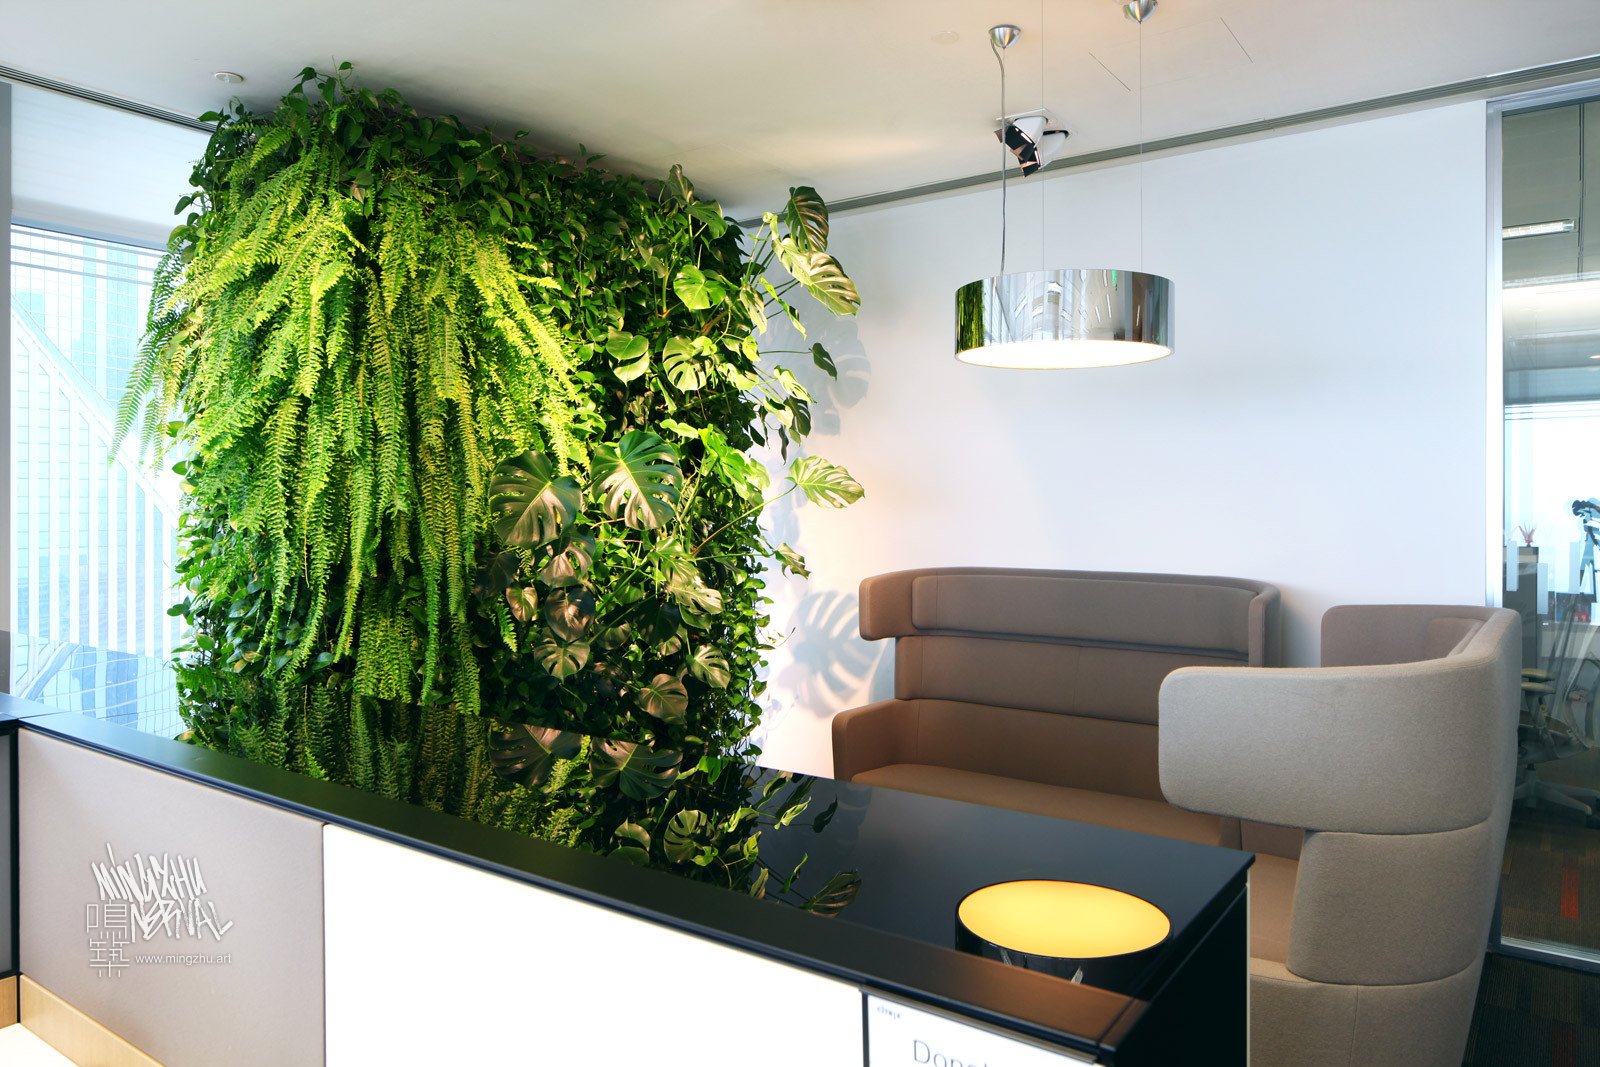 Mingzhu Nerval vertical living wall experts created a healthy nature workspace at Citrix Systems in Shanghai, 2011